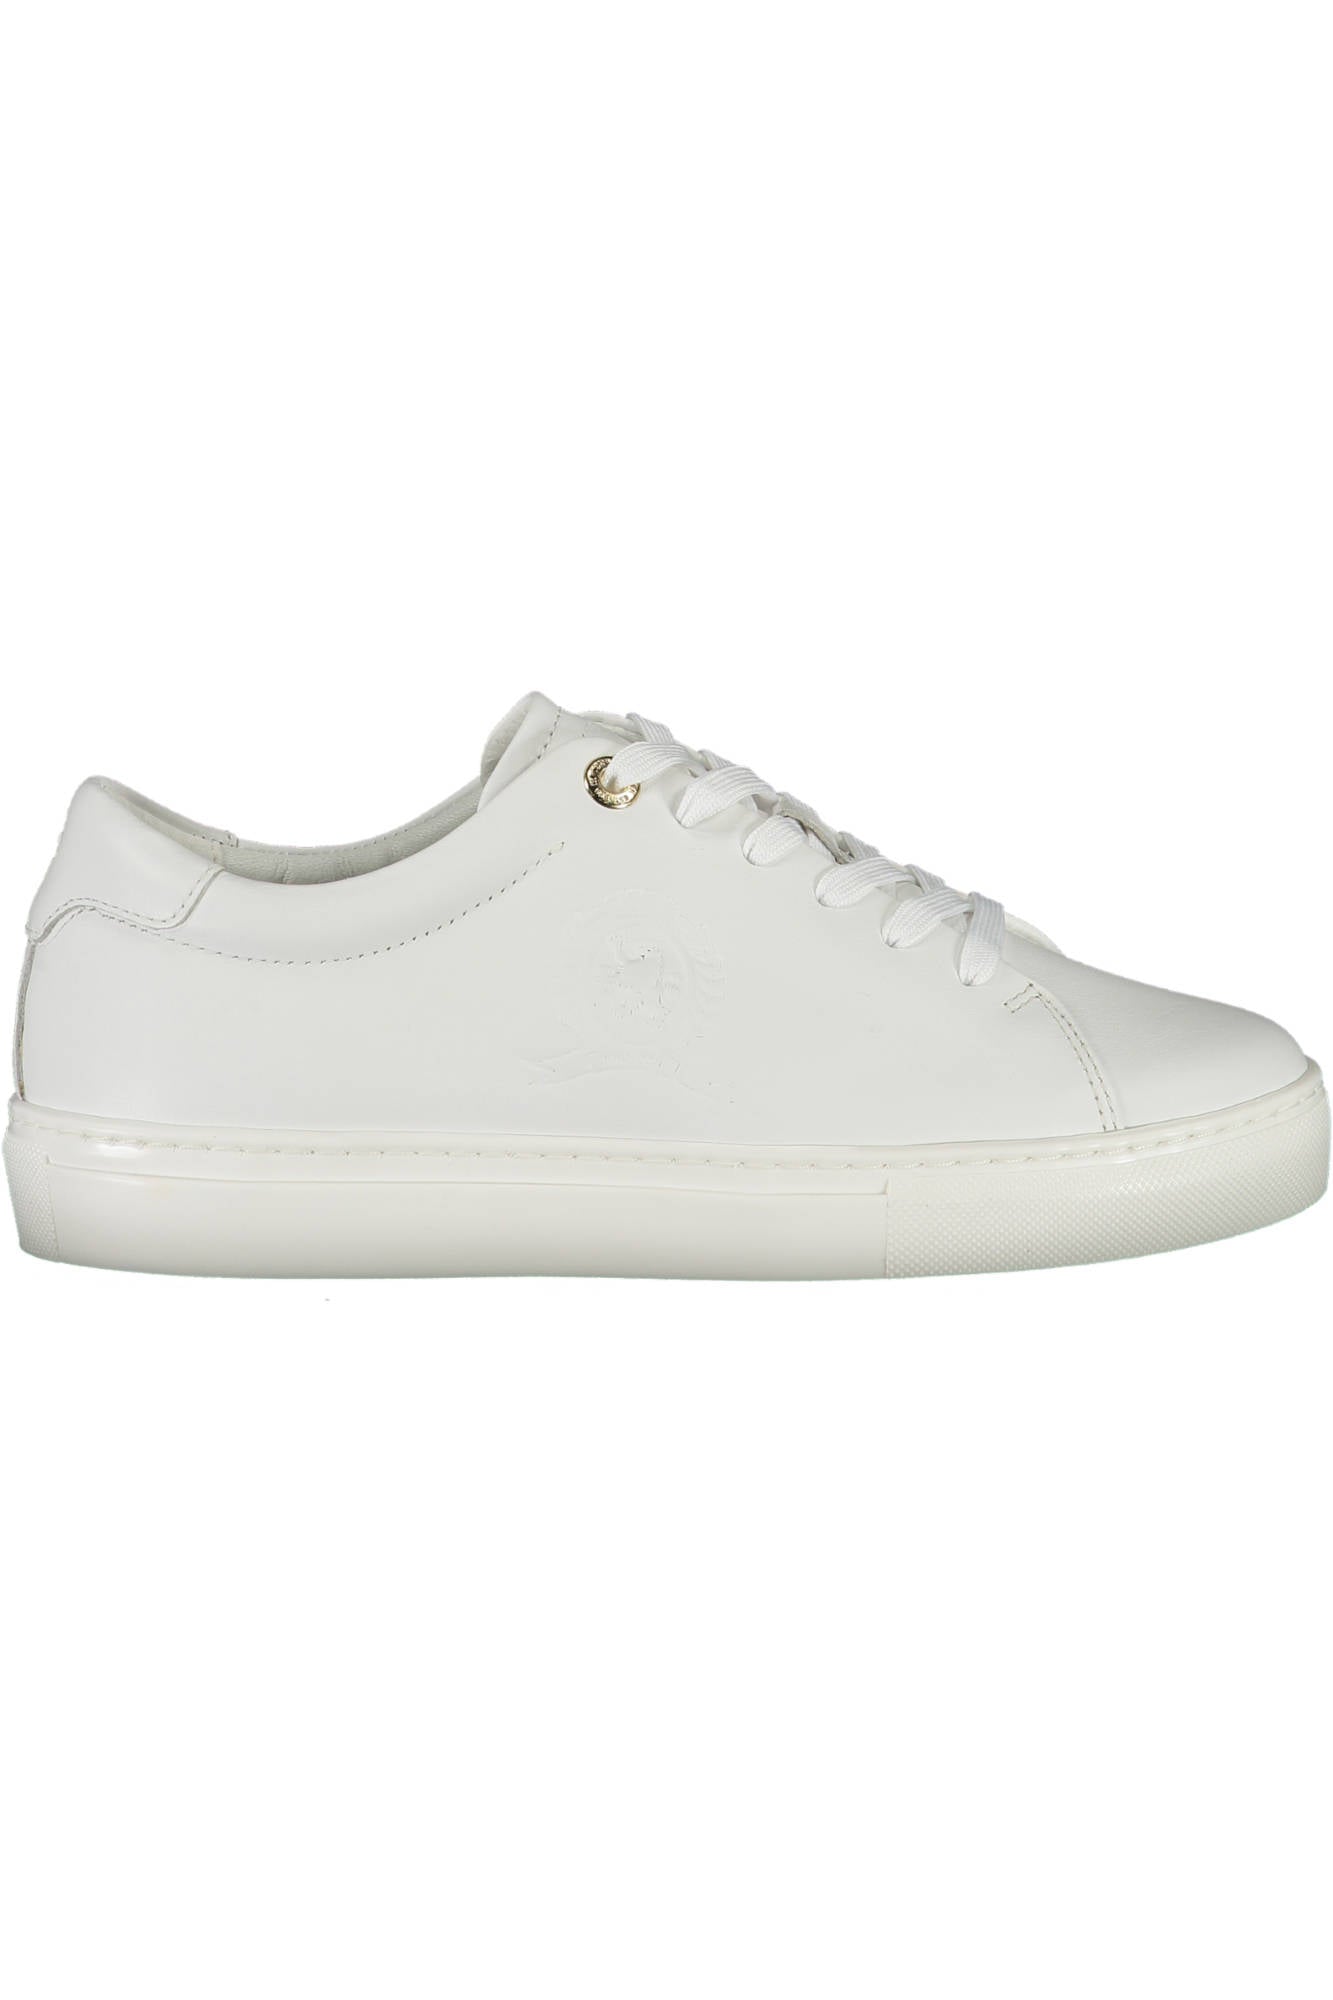 TOMMY HILFIGER WOMEN'S WHITE SPORTS SHOES-Shoes - Women-TOMMY HILFIGER-Urbanheer